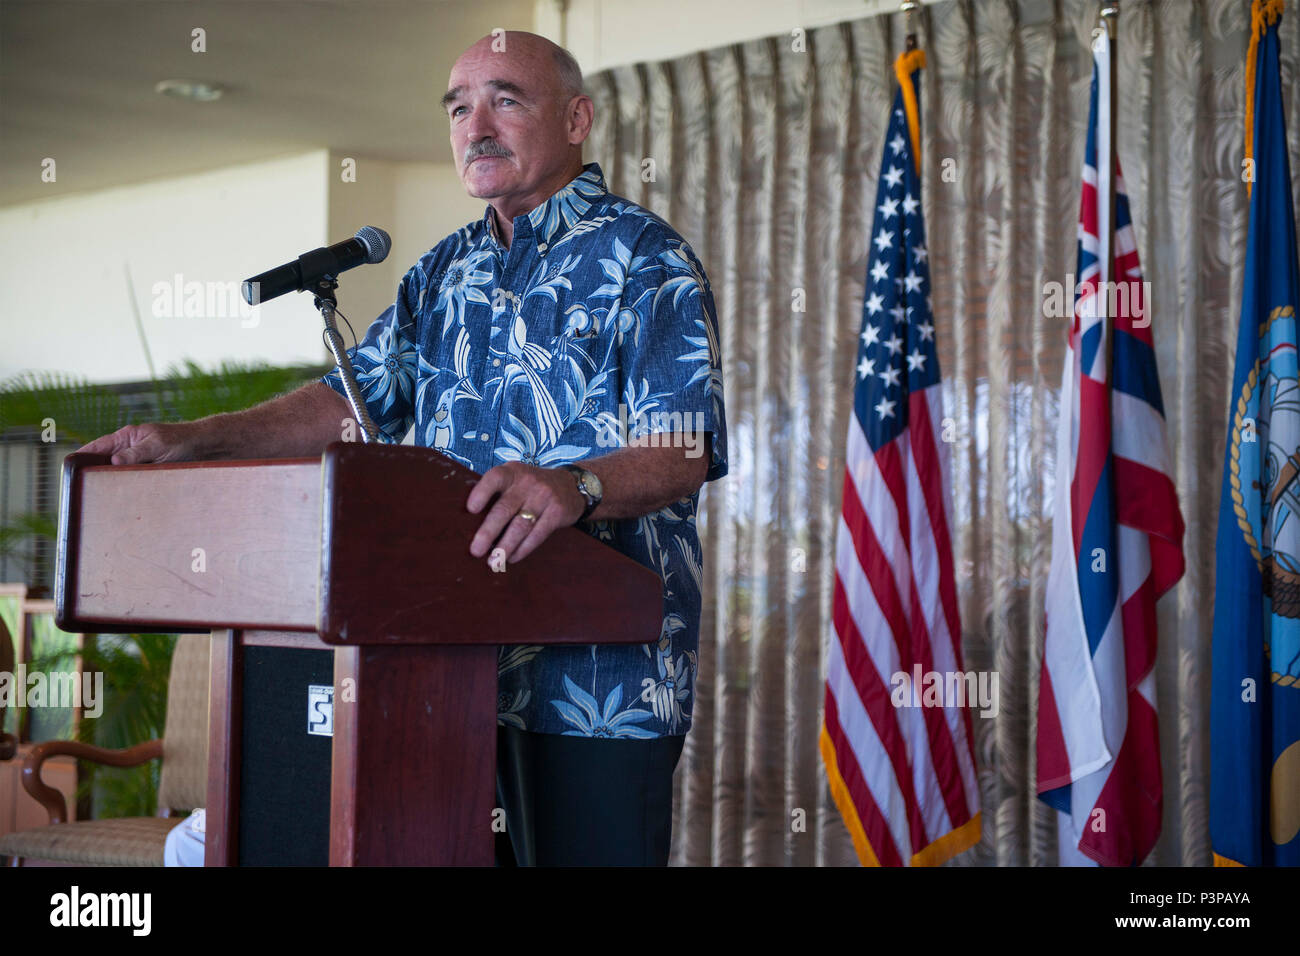 160721-N-AV234-140 PEARL HABOR (July 21, 2016) Assistant Secretary of the Navy (Energy, Installations and Environment) Dennis V. McGinn speaks at Historic Hickam Officers’ Club at Joint Base Pearl Harbor-Hickam during a lease signing ceremony between the Depart of the Navy and Hawaii Electric Company.  The DON and Hawaii Electric Company are developing a solar facility on JBPHH. The project will enable the DON to meet critical energy and security goals as well as further Hawaiian Electric’s commitment to renewable energy to the state. (U.S Navy Photo by Mass Communications Specialist 2nd Class Stock Photo